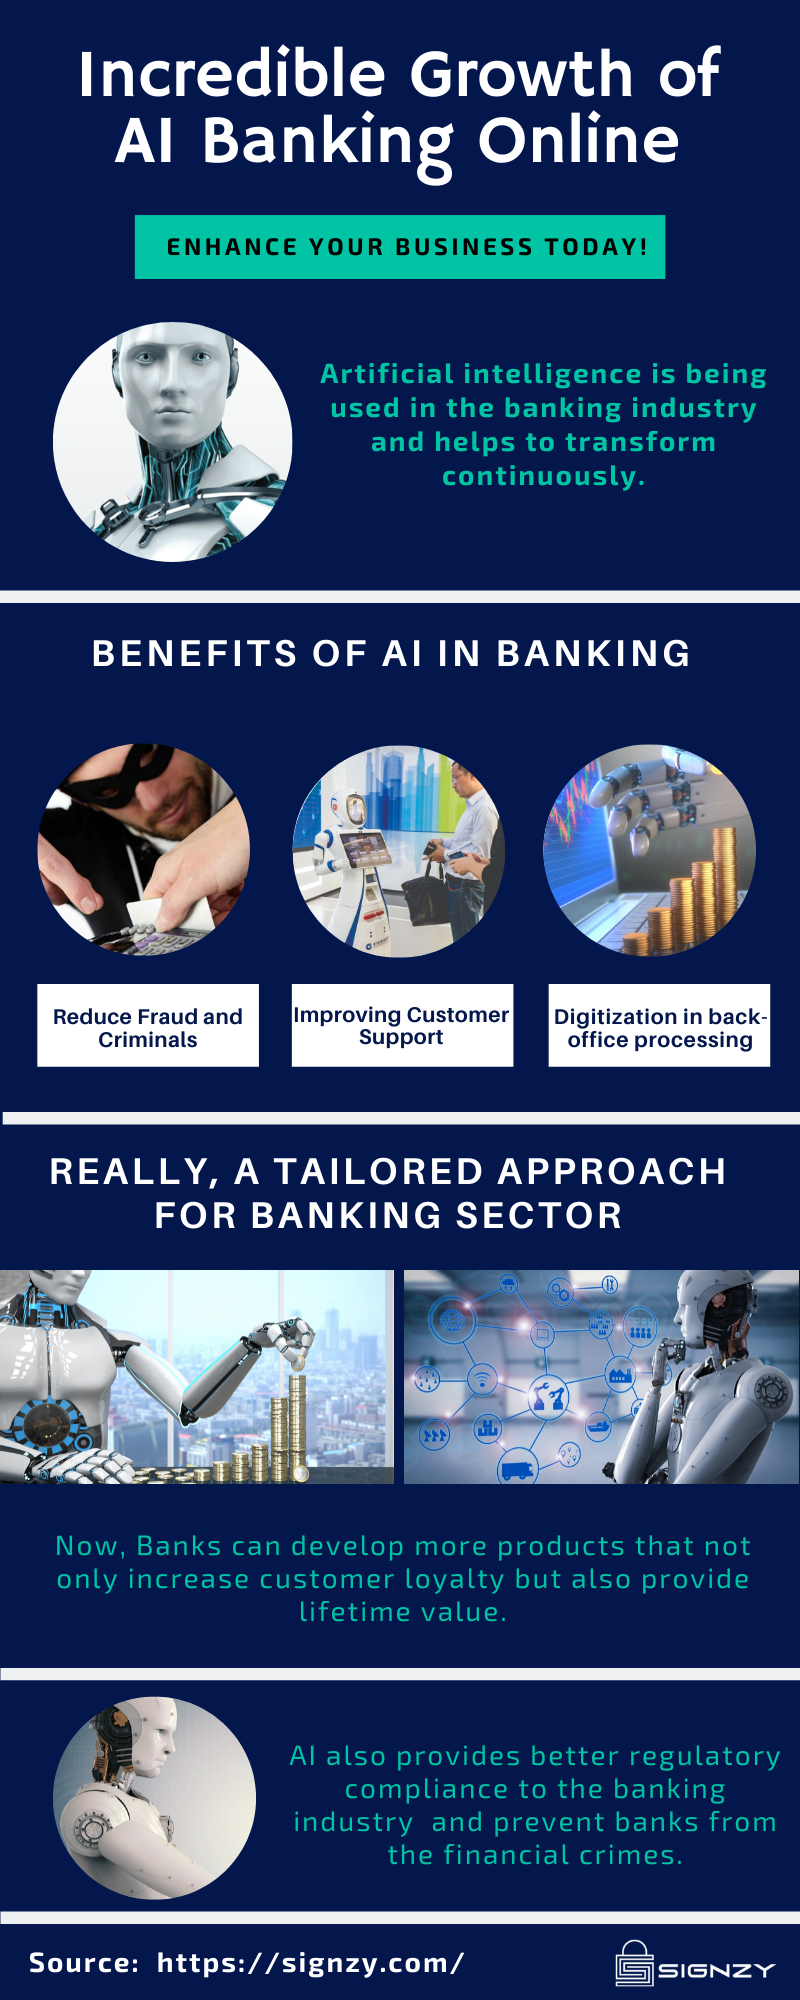 Incredible Growth of AI Banking Online